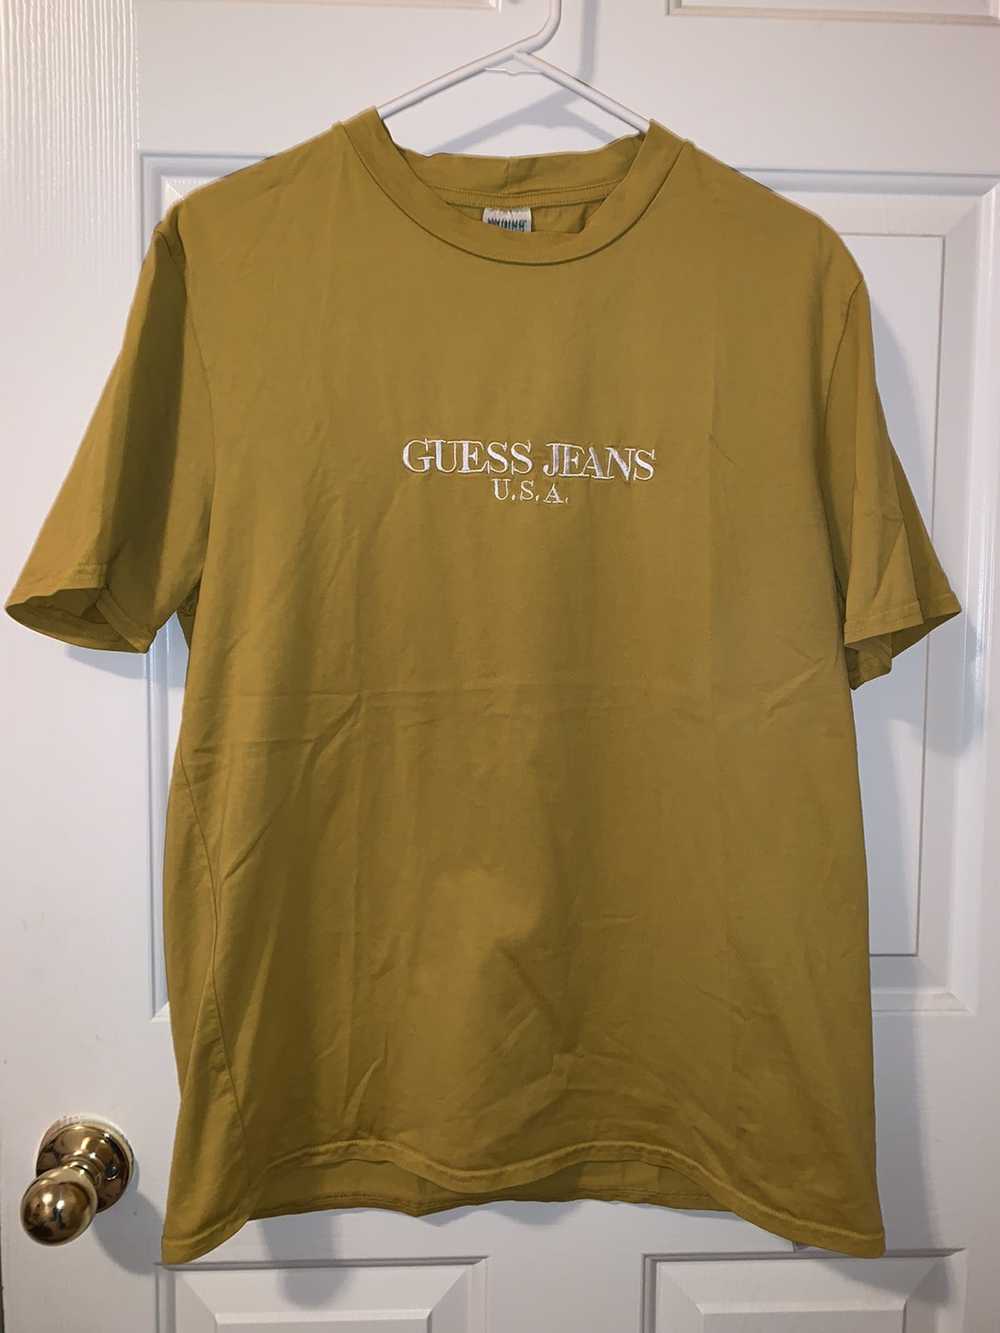 Guess Guess Jeans USA Tee Shirt In Yellow - image 1